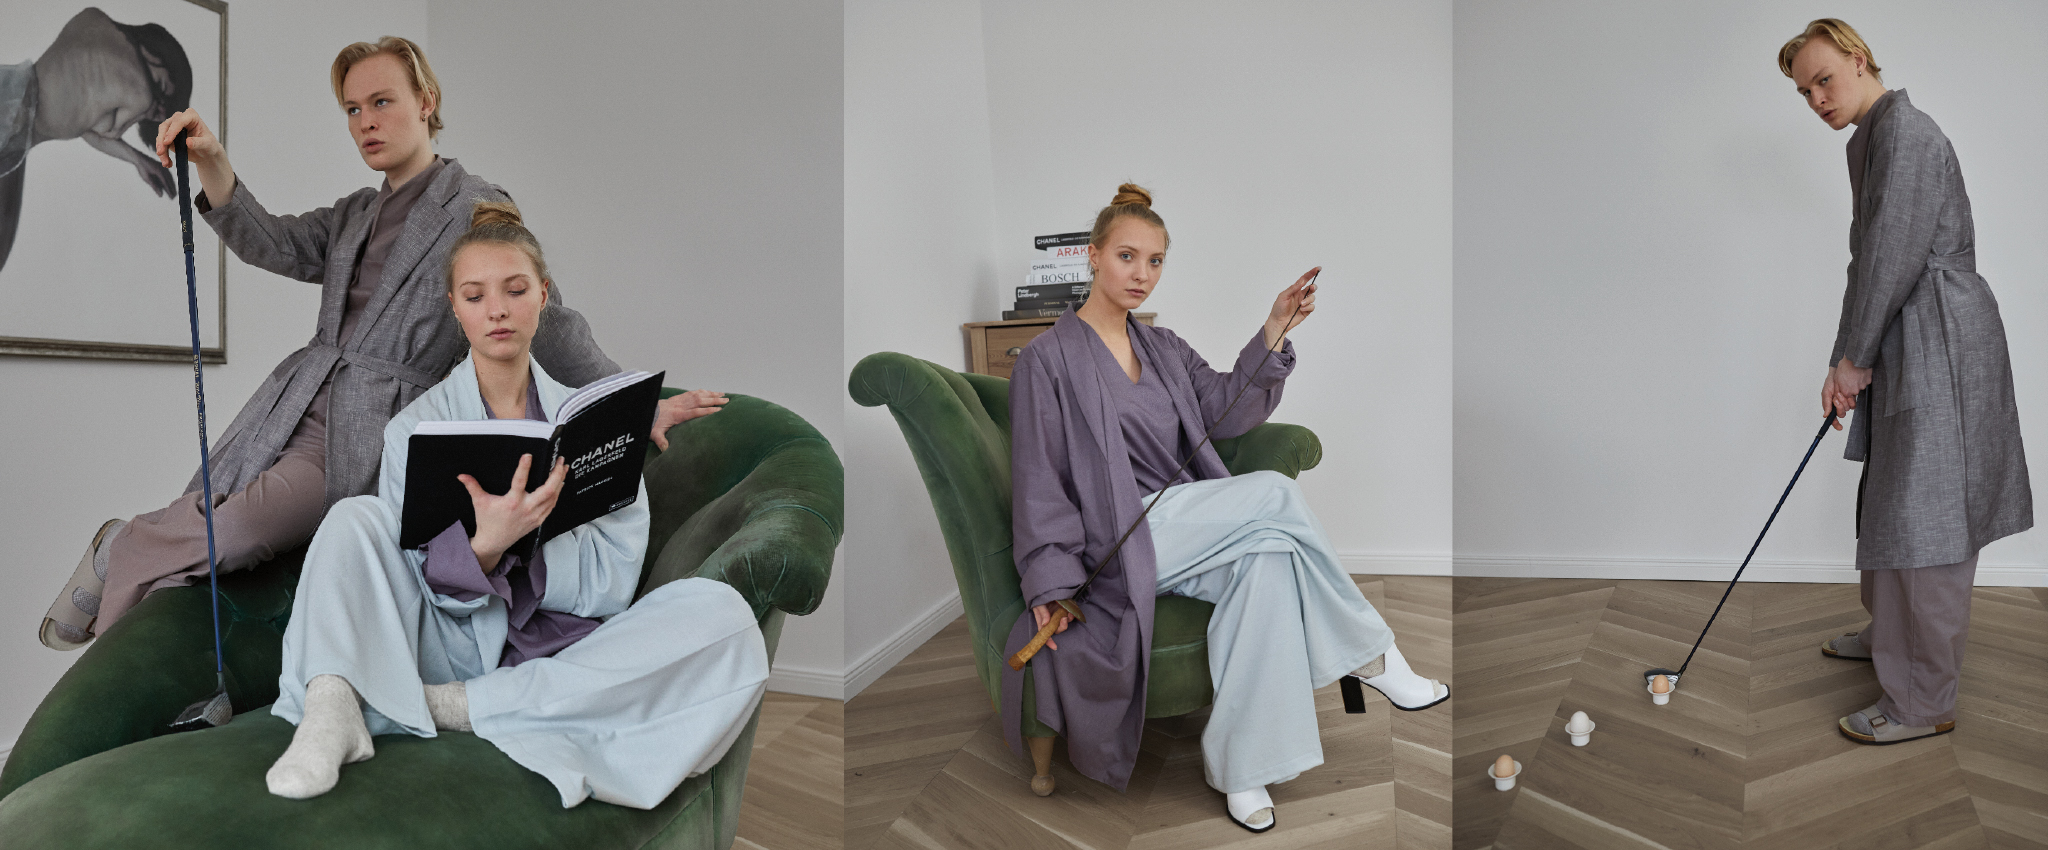 Launch unserer Chaise-Loungewear-Capsule Collection